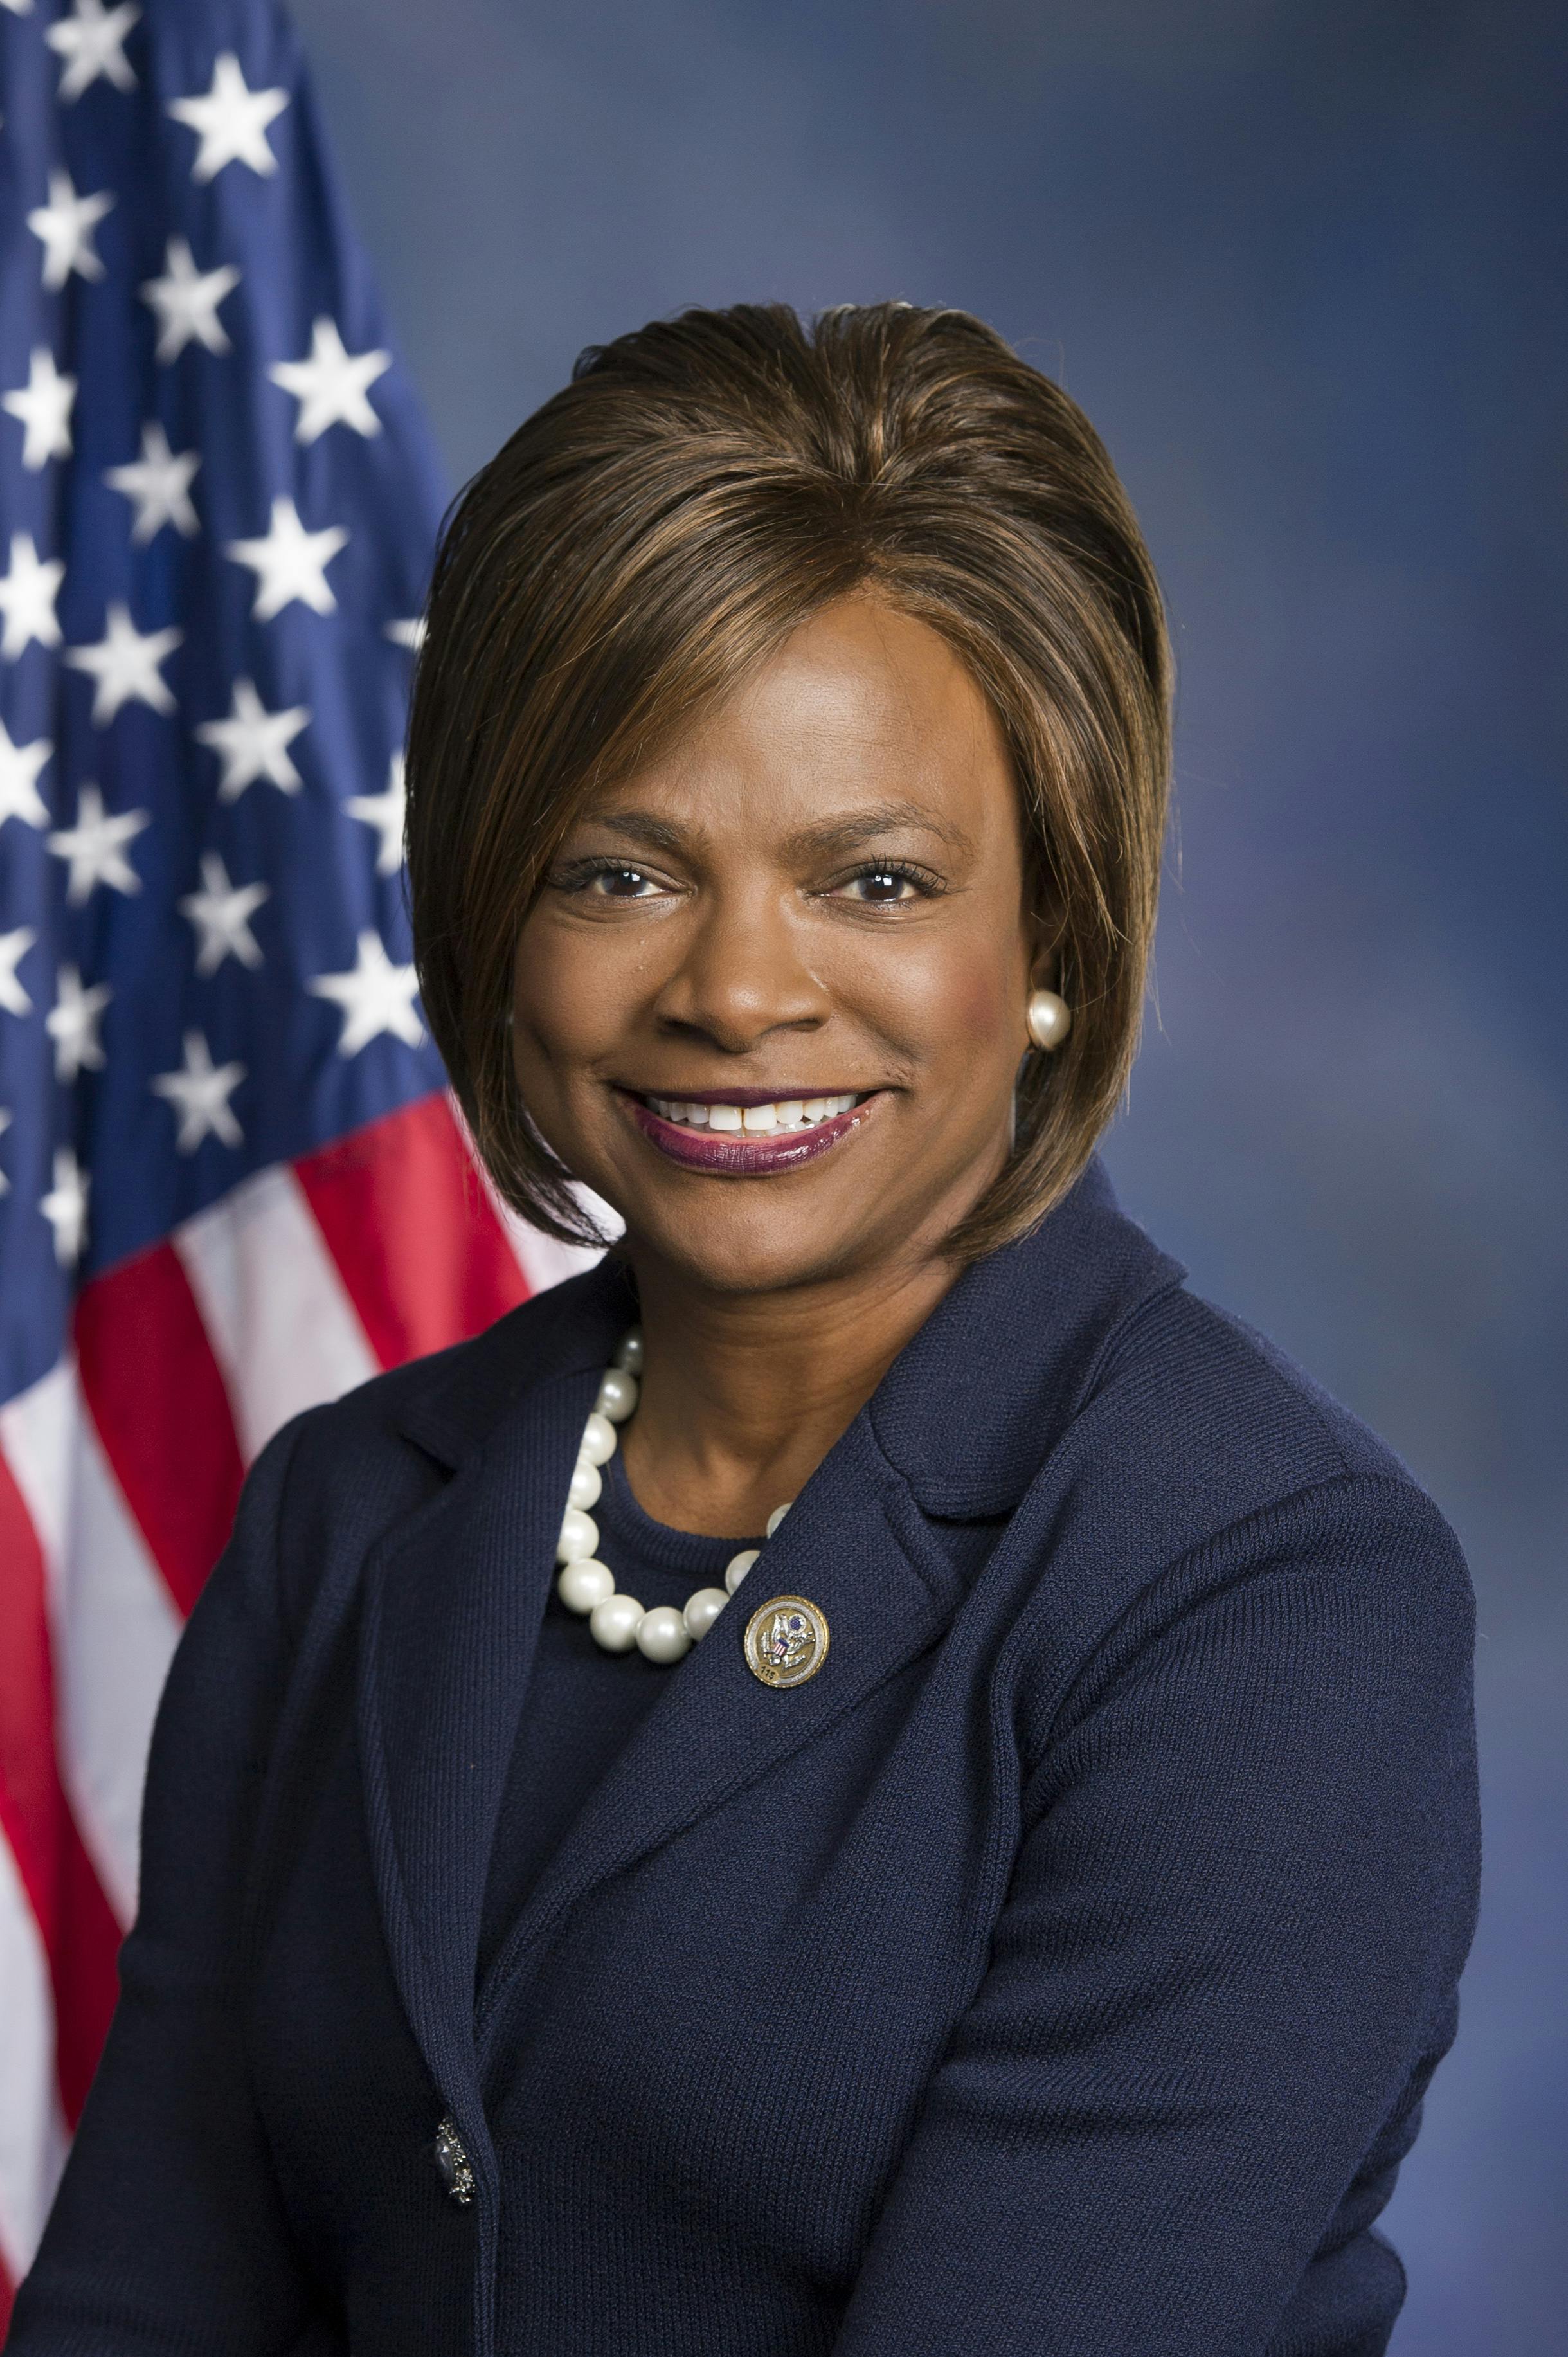 Profile picture of Val Demings